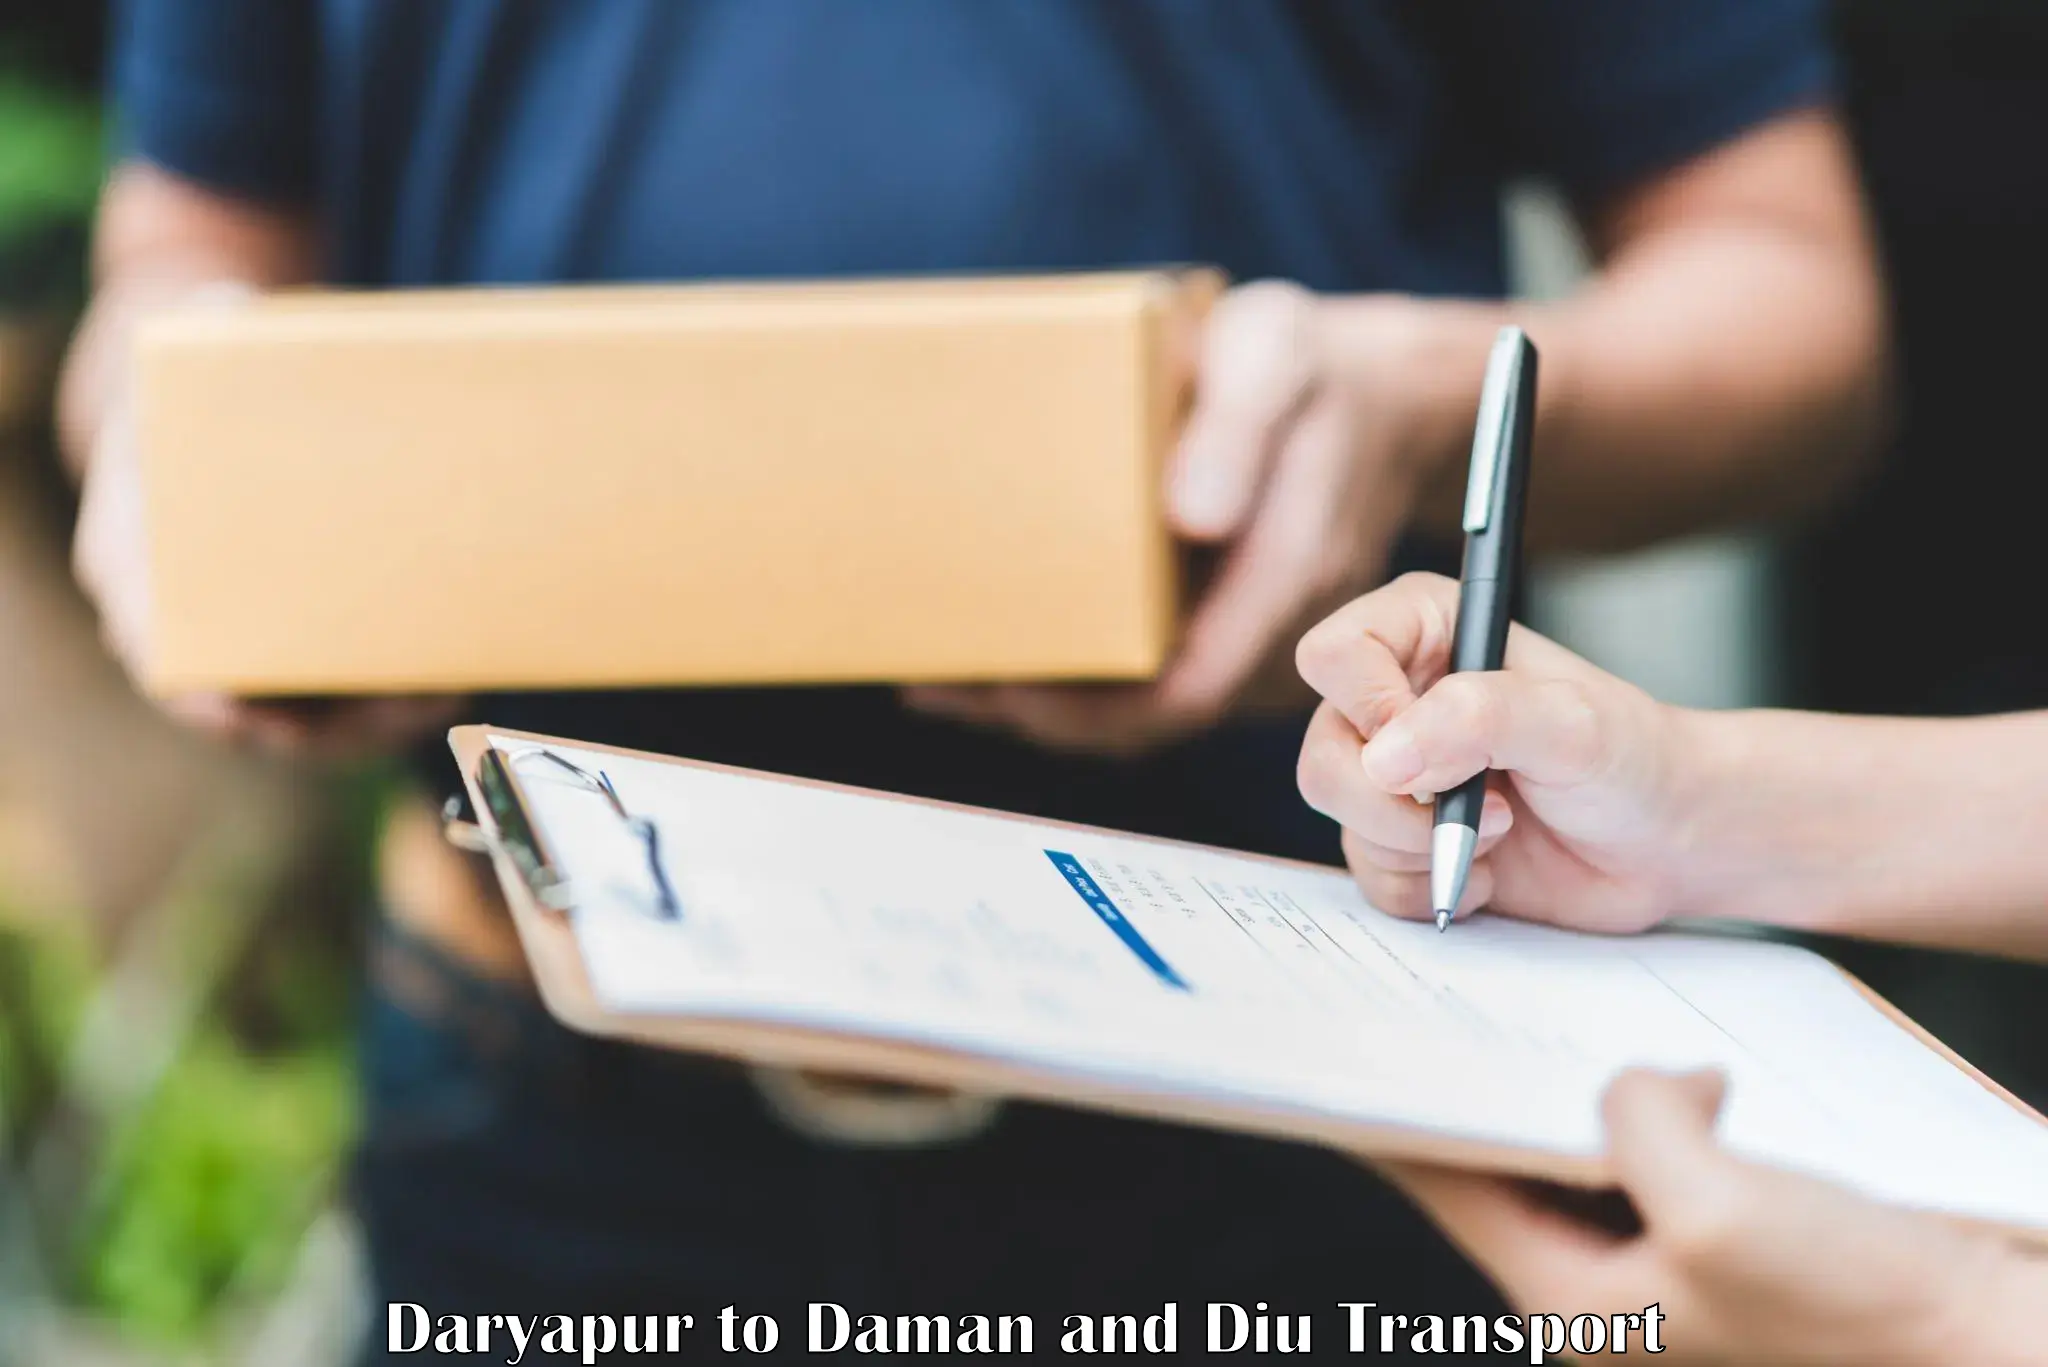 Commercial transport service Daryapur to Daman